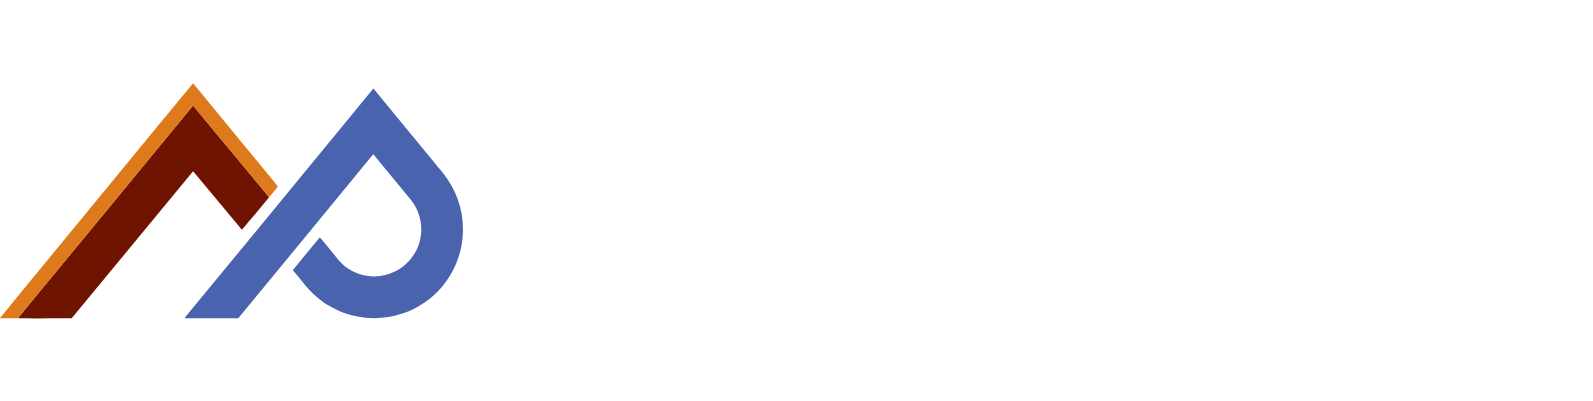 NewAmsterdam Pharma Company logo large for dark backgrounds (transparent PNG)